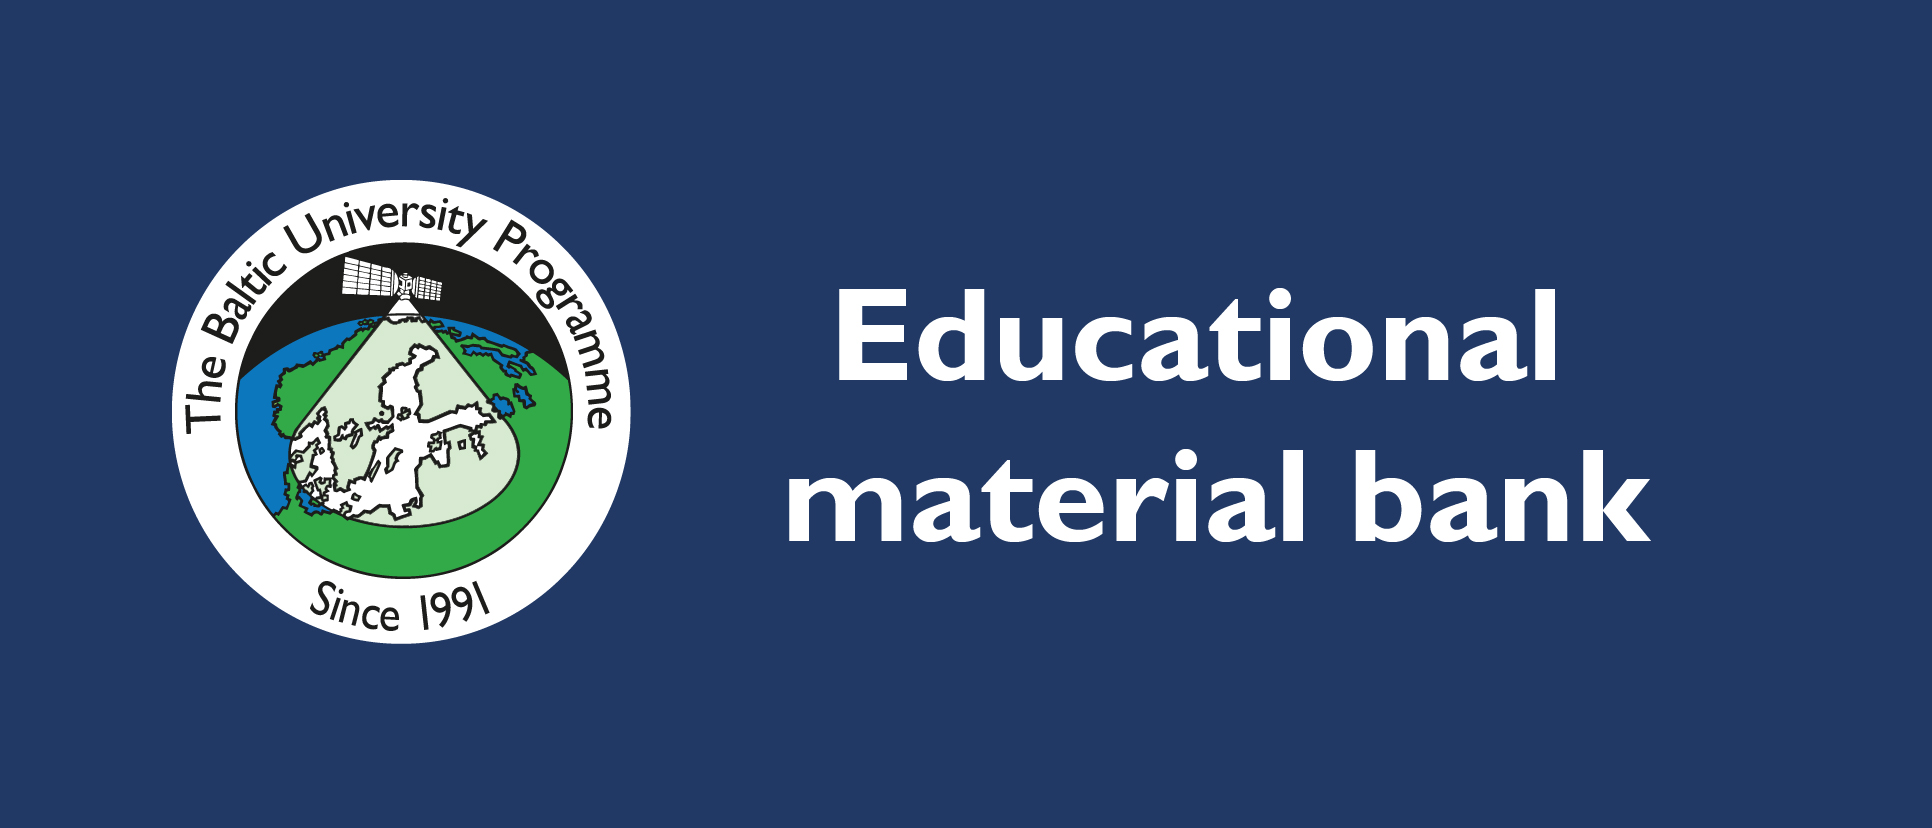 The BUP logo and the text "Educational material bank"